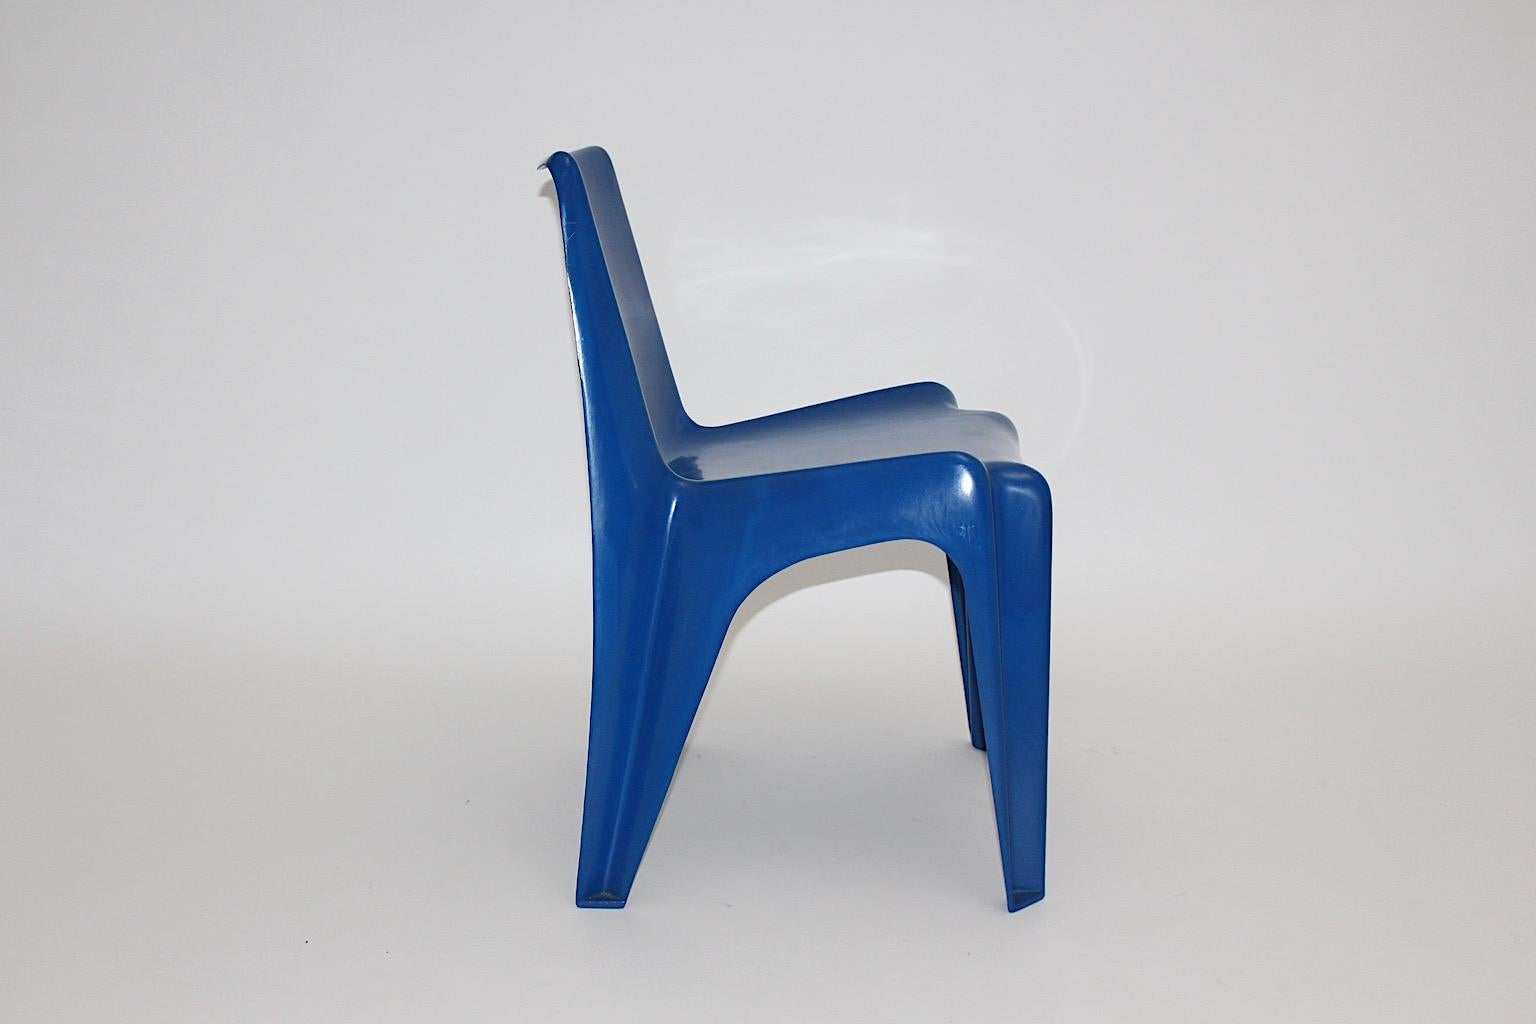 Space Age blue vintage Bofinger chair BA 1171 designed by architect and designer Helmut Bätzner 1964, Germany for Bofinger company.
The Bofinger chair came out in 1966 at the furniture fair in Germany.
Also the Bofinger chair was used as an art